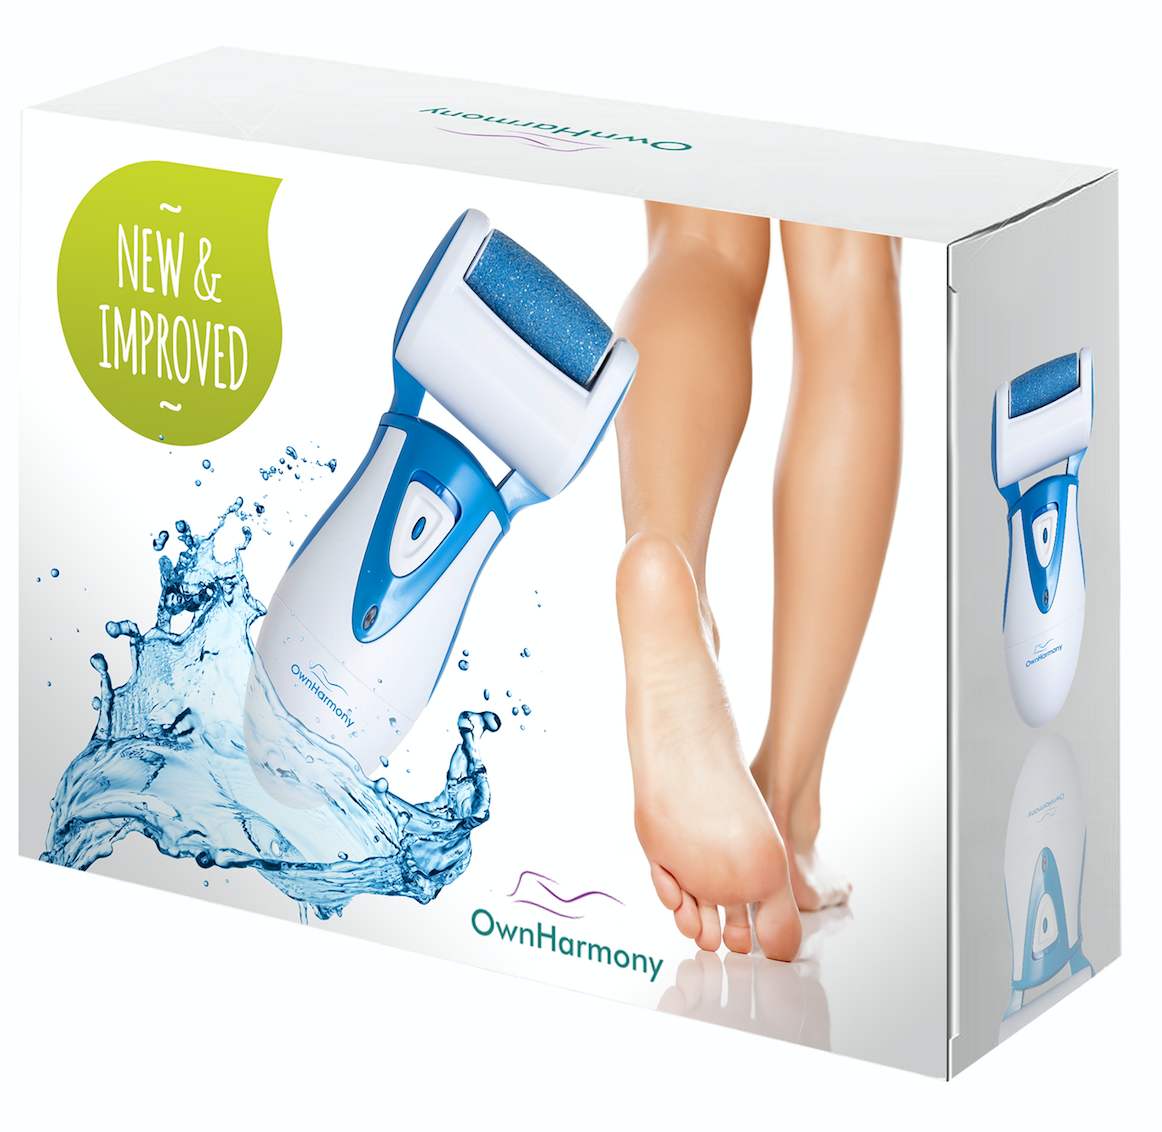 https://www.momjunction.com/wp-content/uploads/product-images/own-harmony-electric-callus-remover_afl412.png